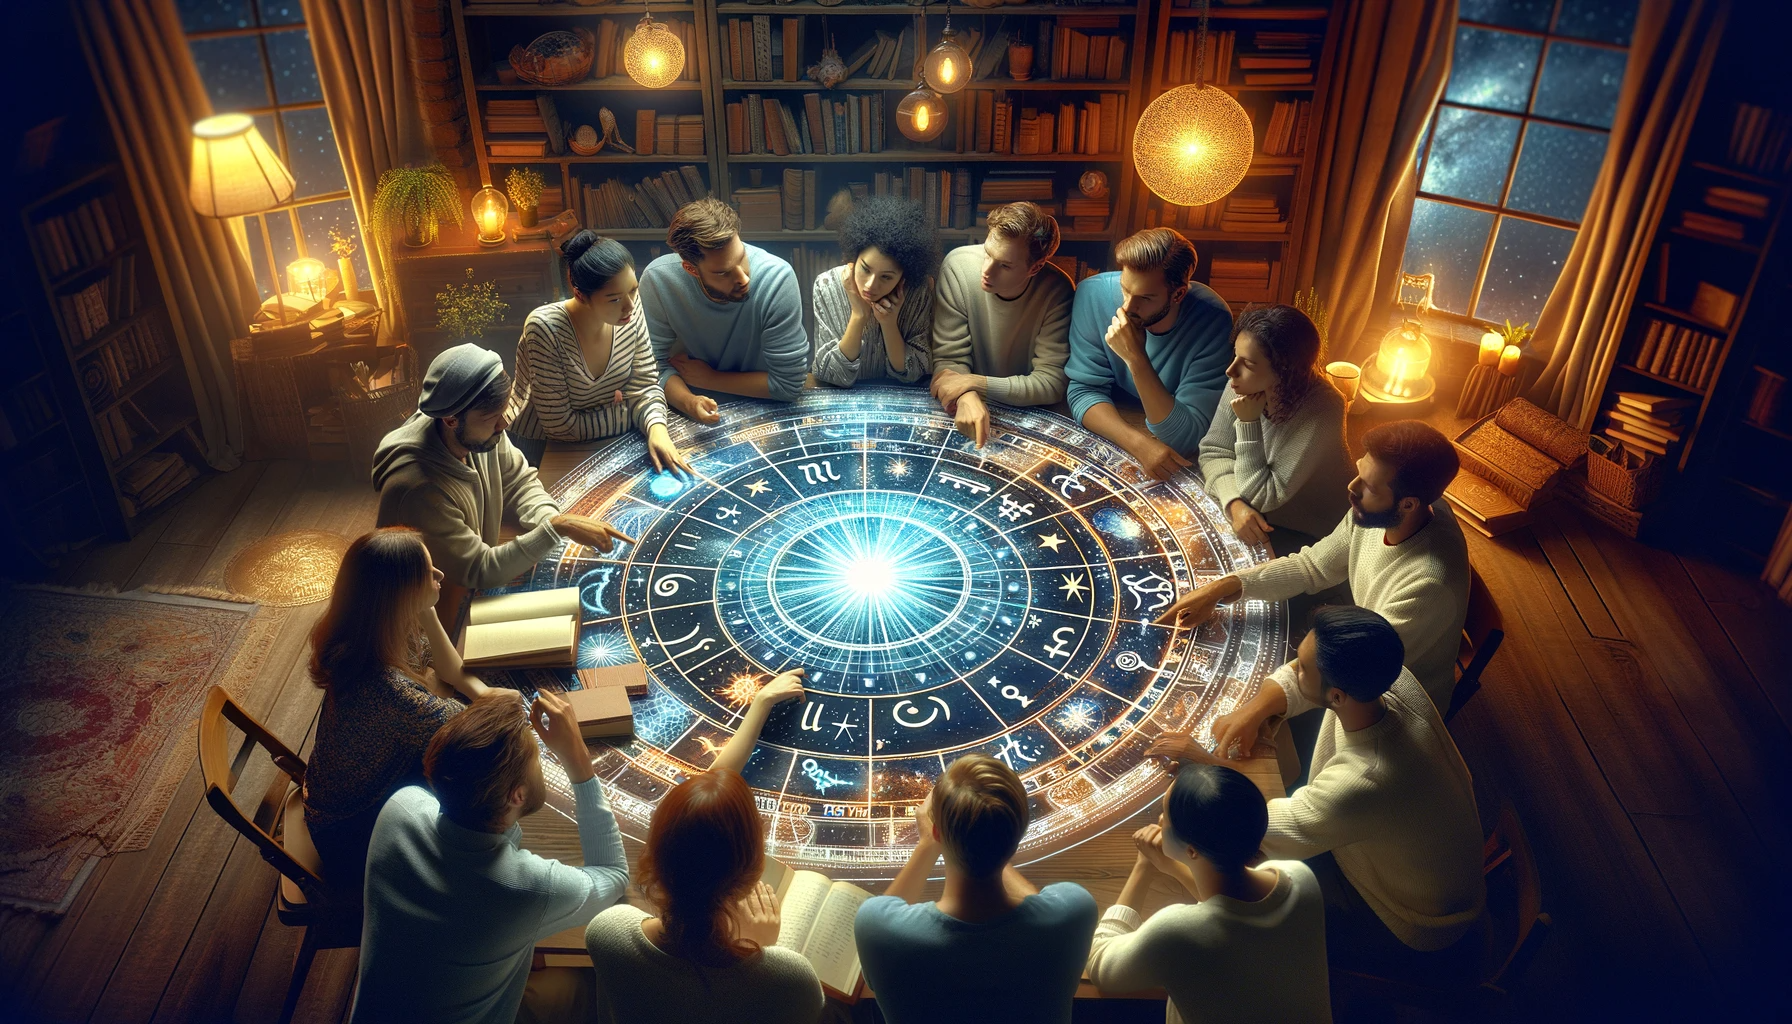 ·E 2023 11 25 15.09.28   A featured image for a blog article about using astrology in daily life. The image should depict a diverse group of people gathered around a large, in.png